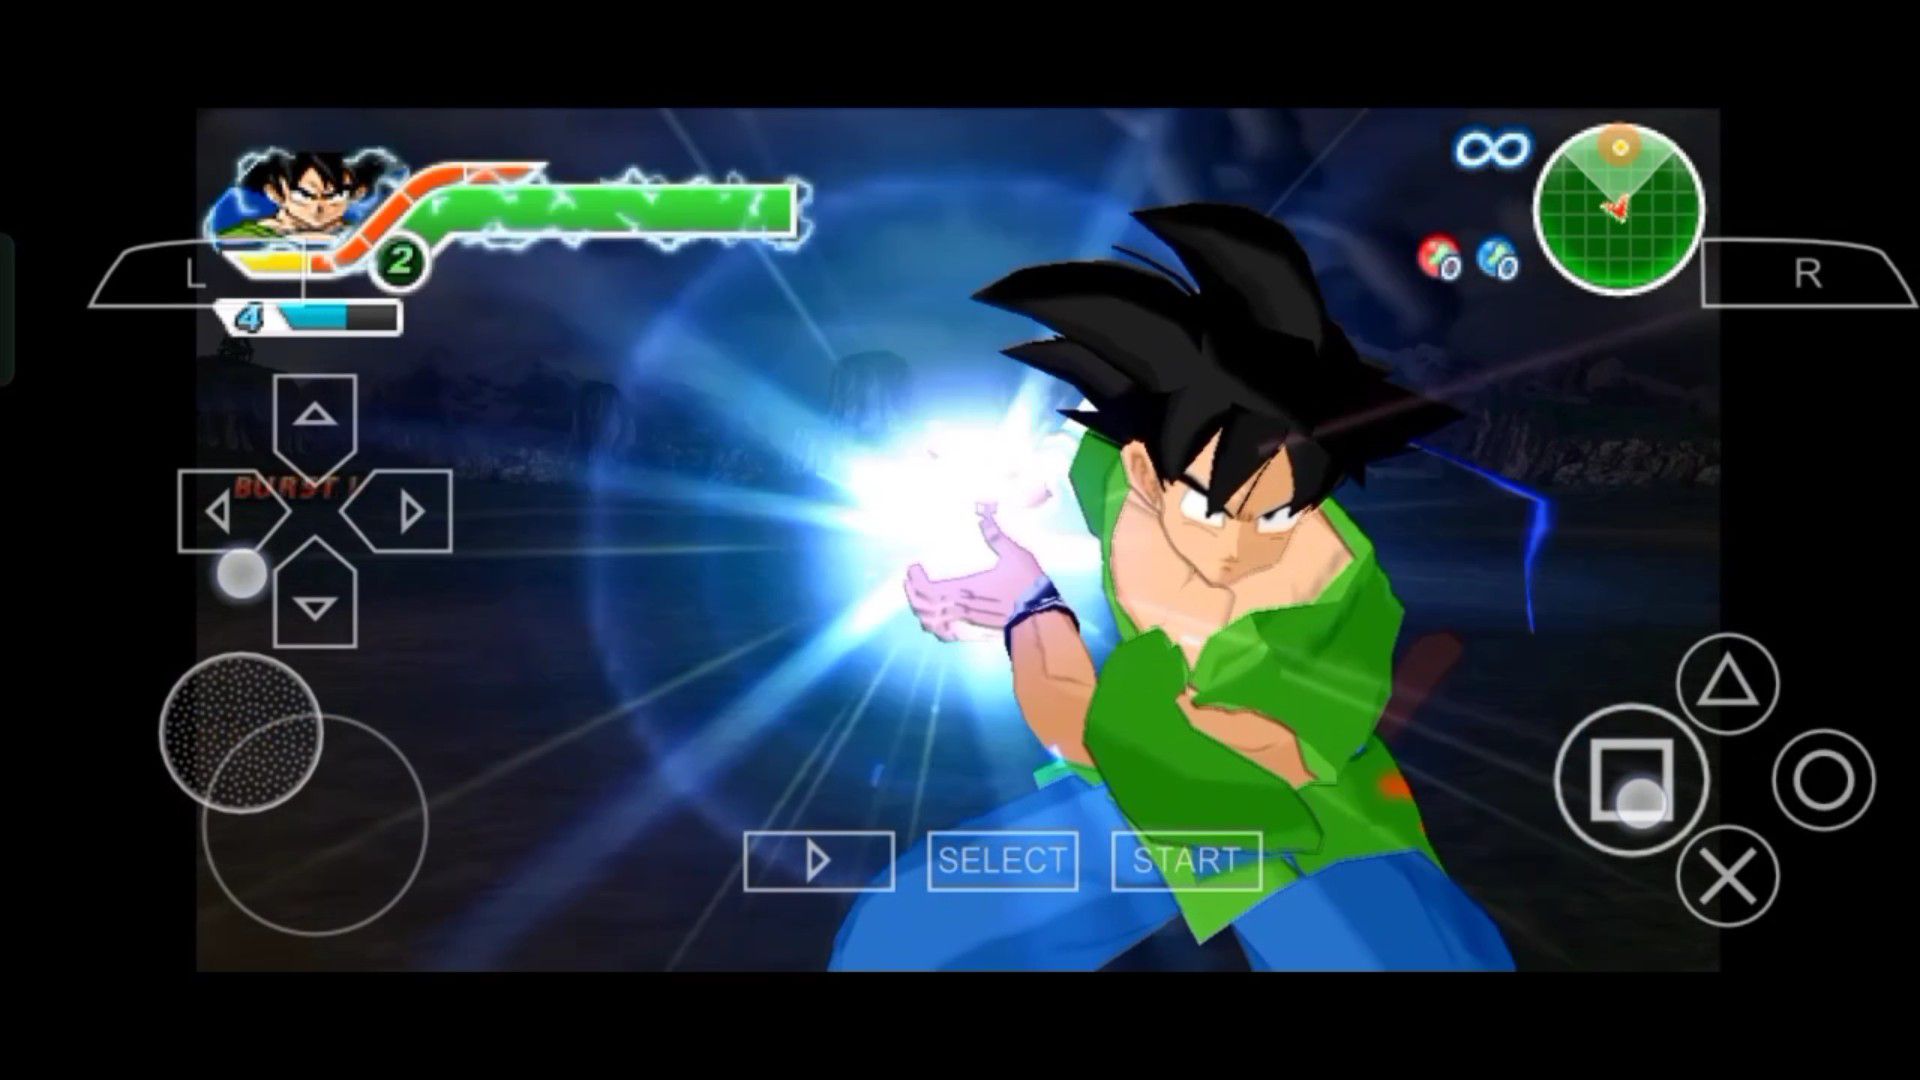 Dragon Ball Z Kakarot psp download android ppsspp 2022